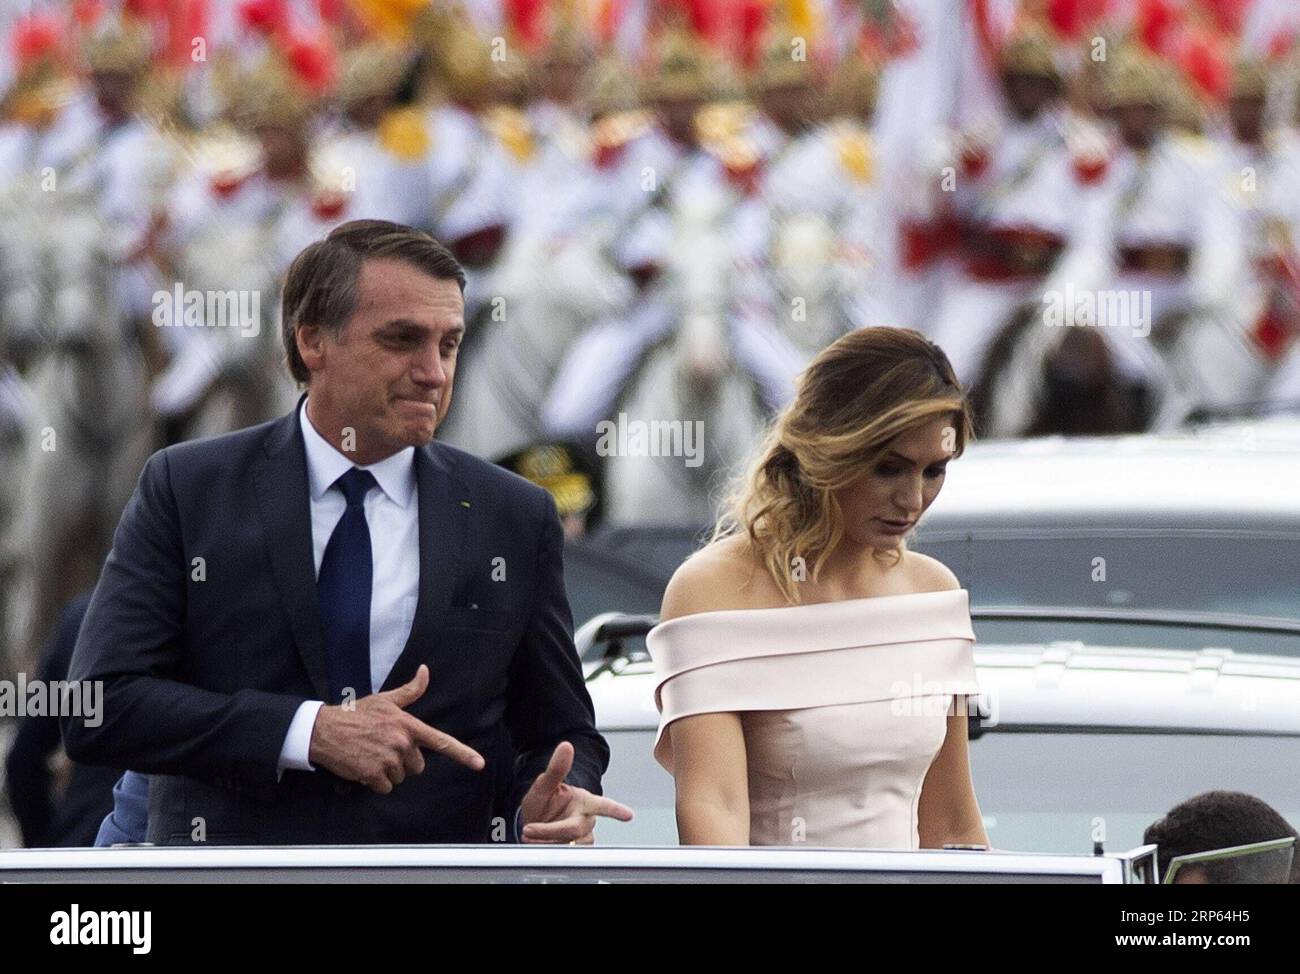 (190101) -- BRASILIA, Jan. 1, 2019 -- Photo provided by Agencia Estado shows Brazil s President-elect Jair Bolsonaro (L) and his wife Michelle Bolsonaro arriving at Brazil s National Congress prior to his inauguration ceremony in Brasilia, Brazil, on Jan. 1, 2019. Brazil s President-elect Jair Bolsonaro will be sworn in on Tuesday amid tight security, including more than 3,200 civilian and military security personnel, combat aircraft and surface-to-air missiles. AGENCIA ESTADO/Gabriela Bilo) ***BRAZIL OUT*** BRAZIL-BRASILIA-PRESIDENT-ELECT-JAIR BOLSONARO-INAUGURATION AE PUBLICATIONxNOTxINxCHN Stock Photo